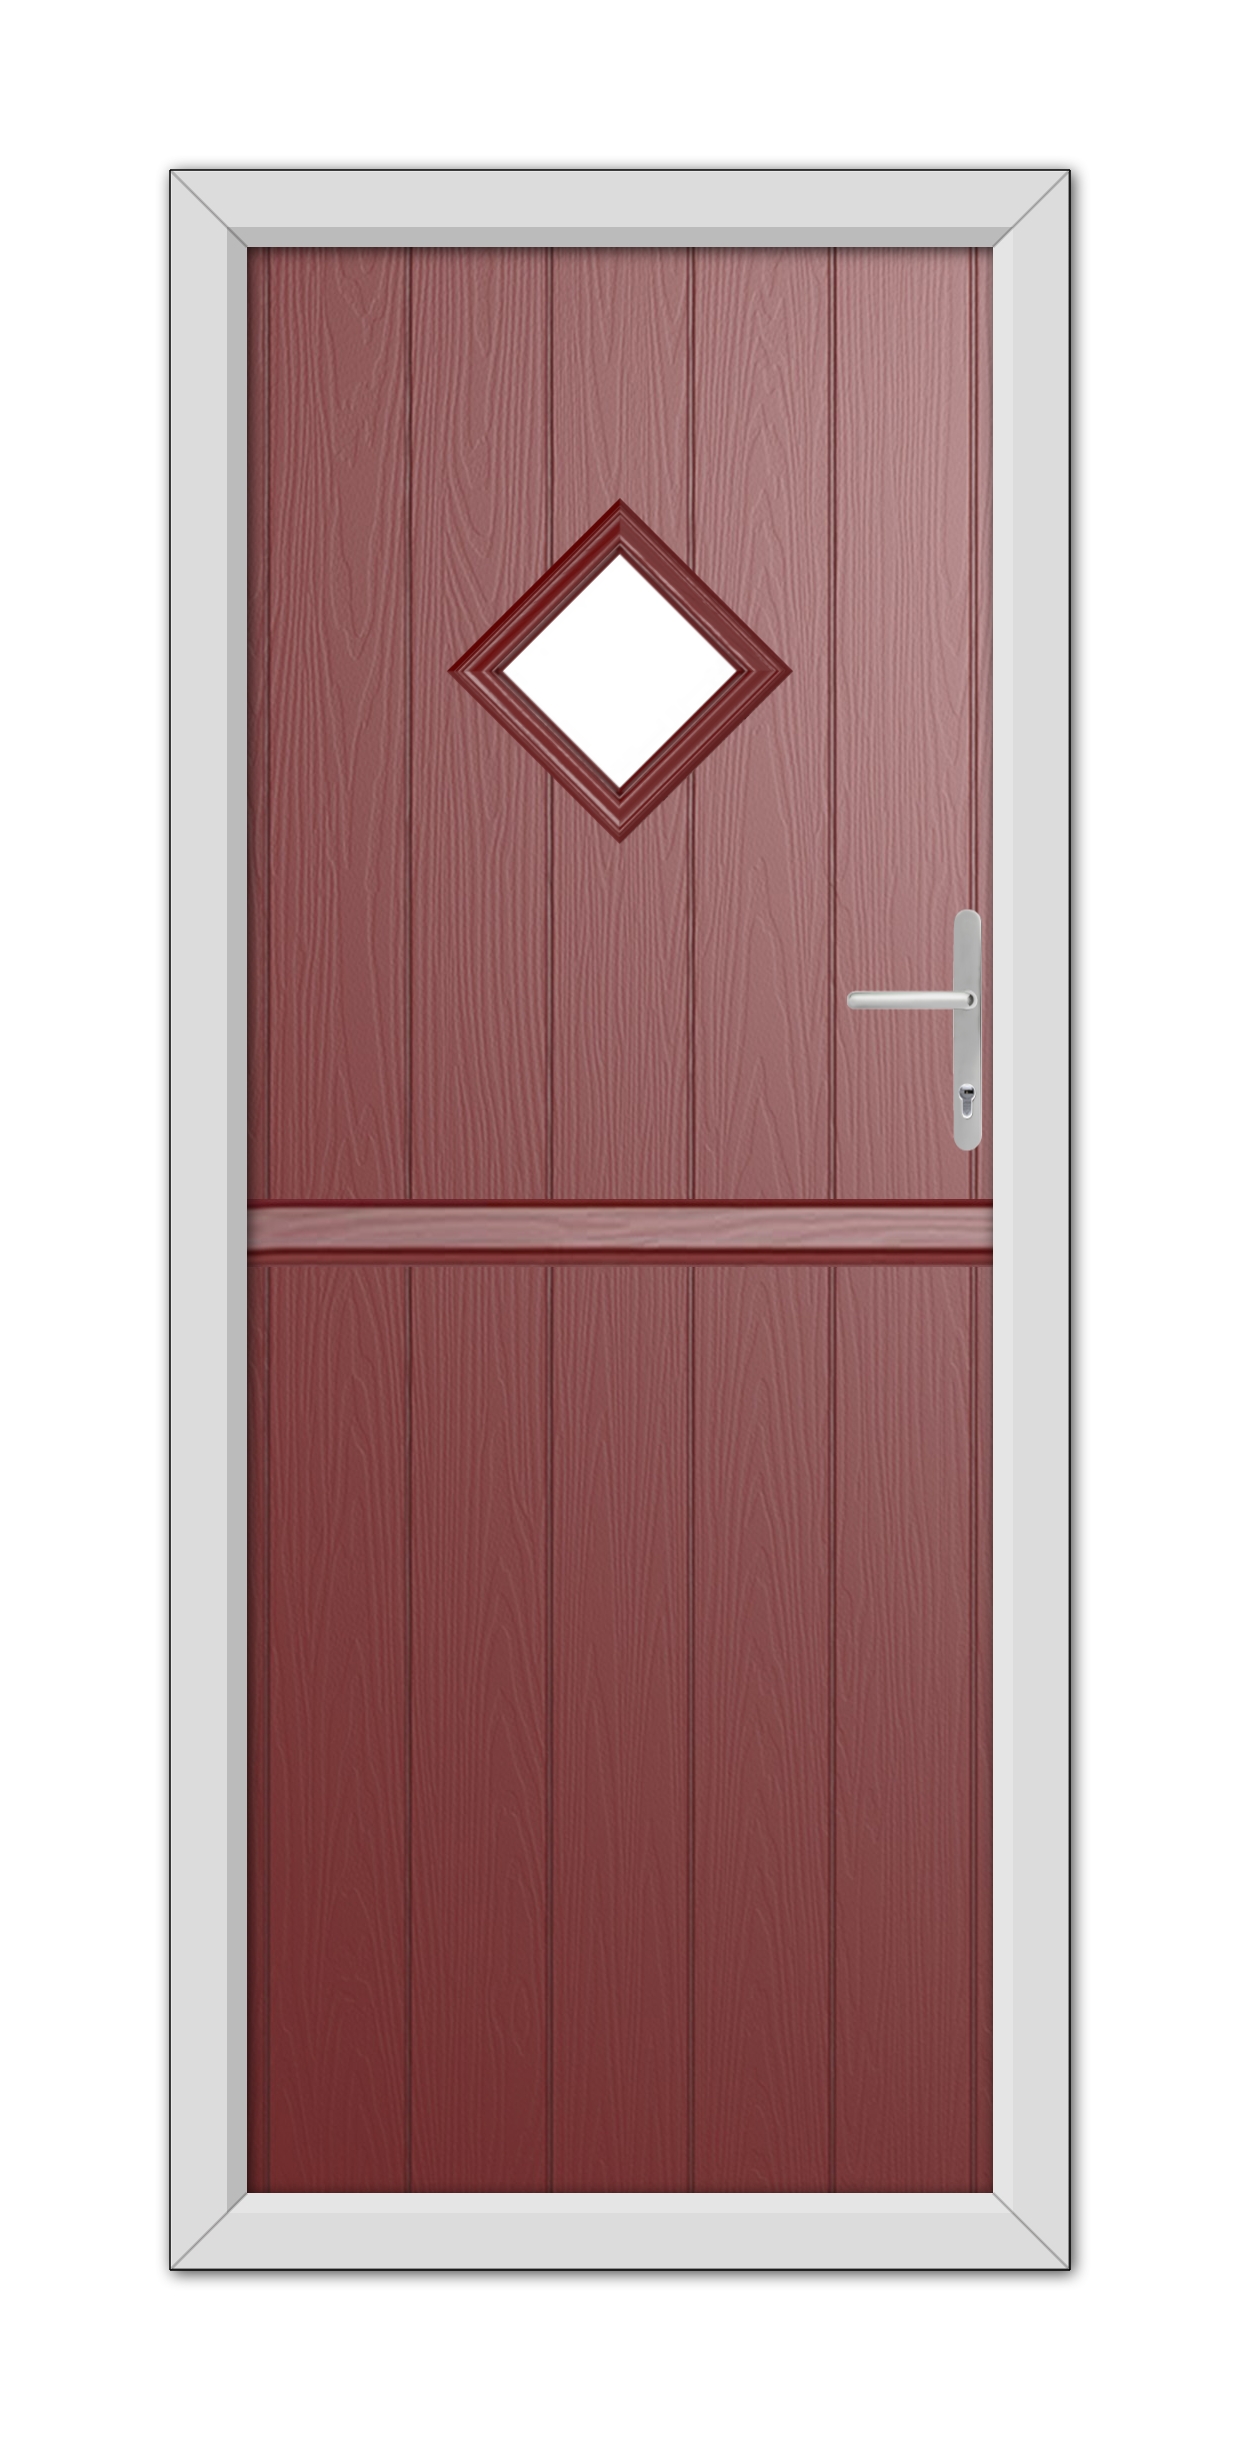 A modern Red Cornwall Stable Composite Door 48mm Timber Core with a diamond-shaped window and a silver handle, set in a white frame.